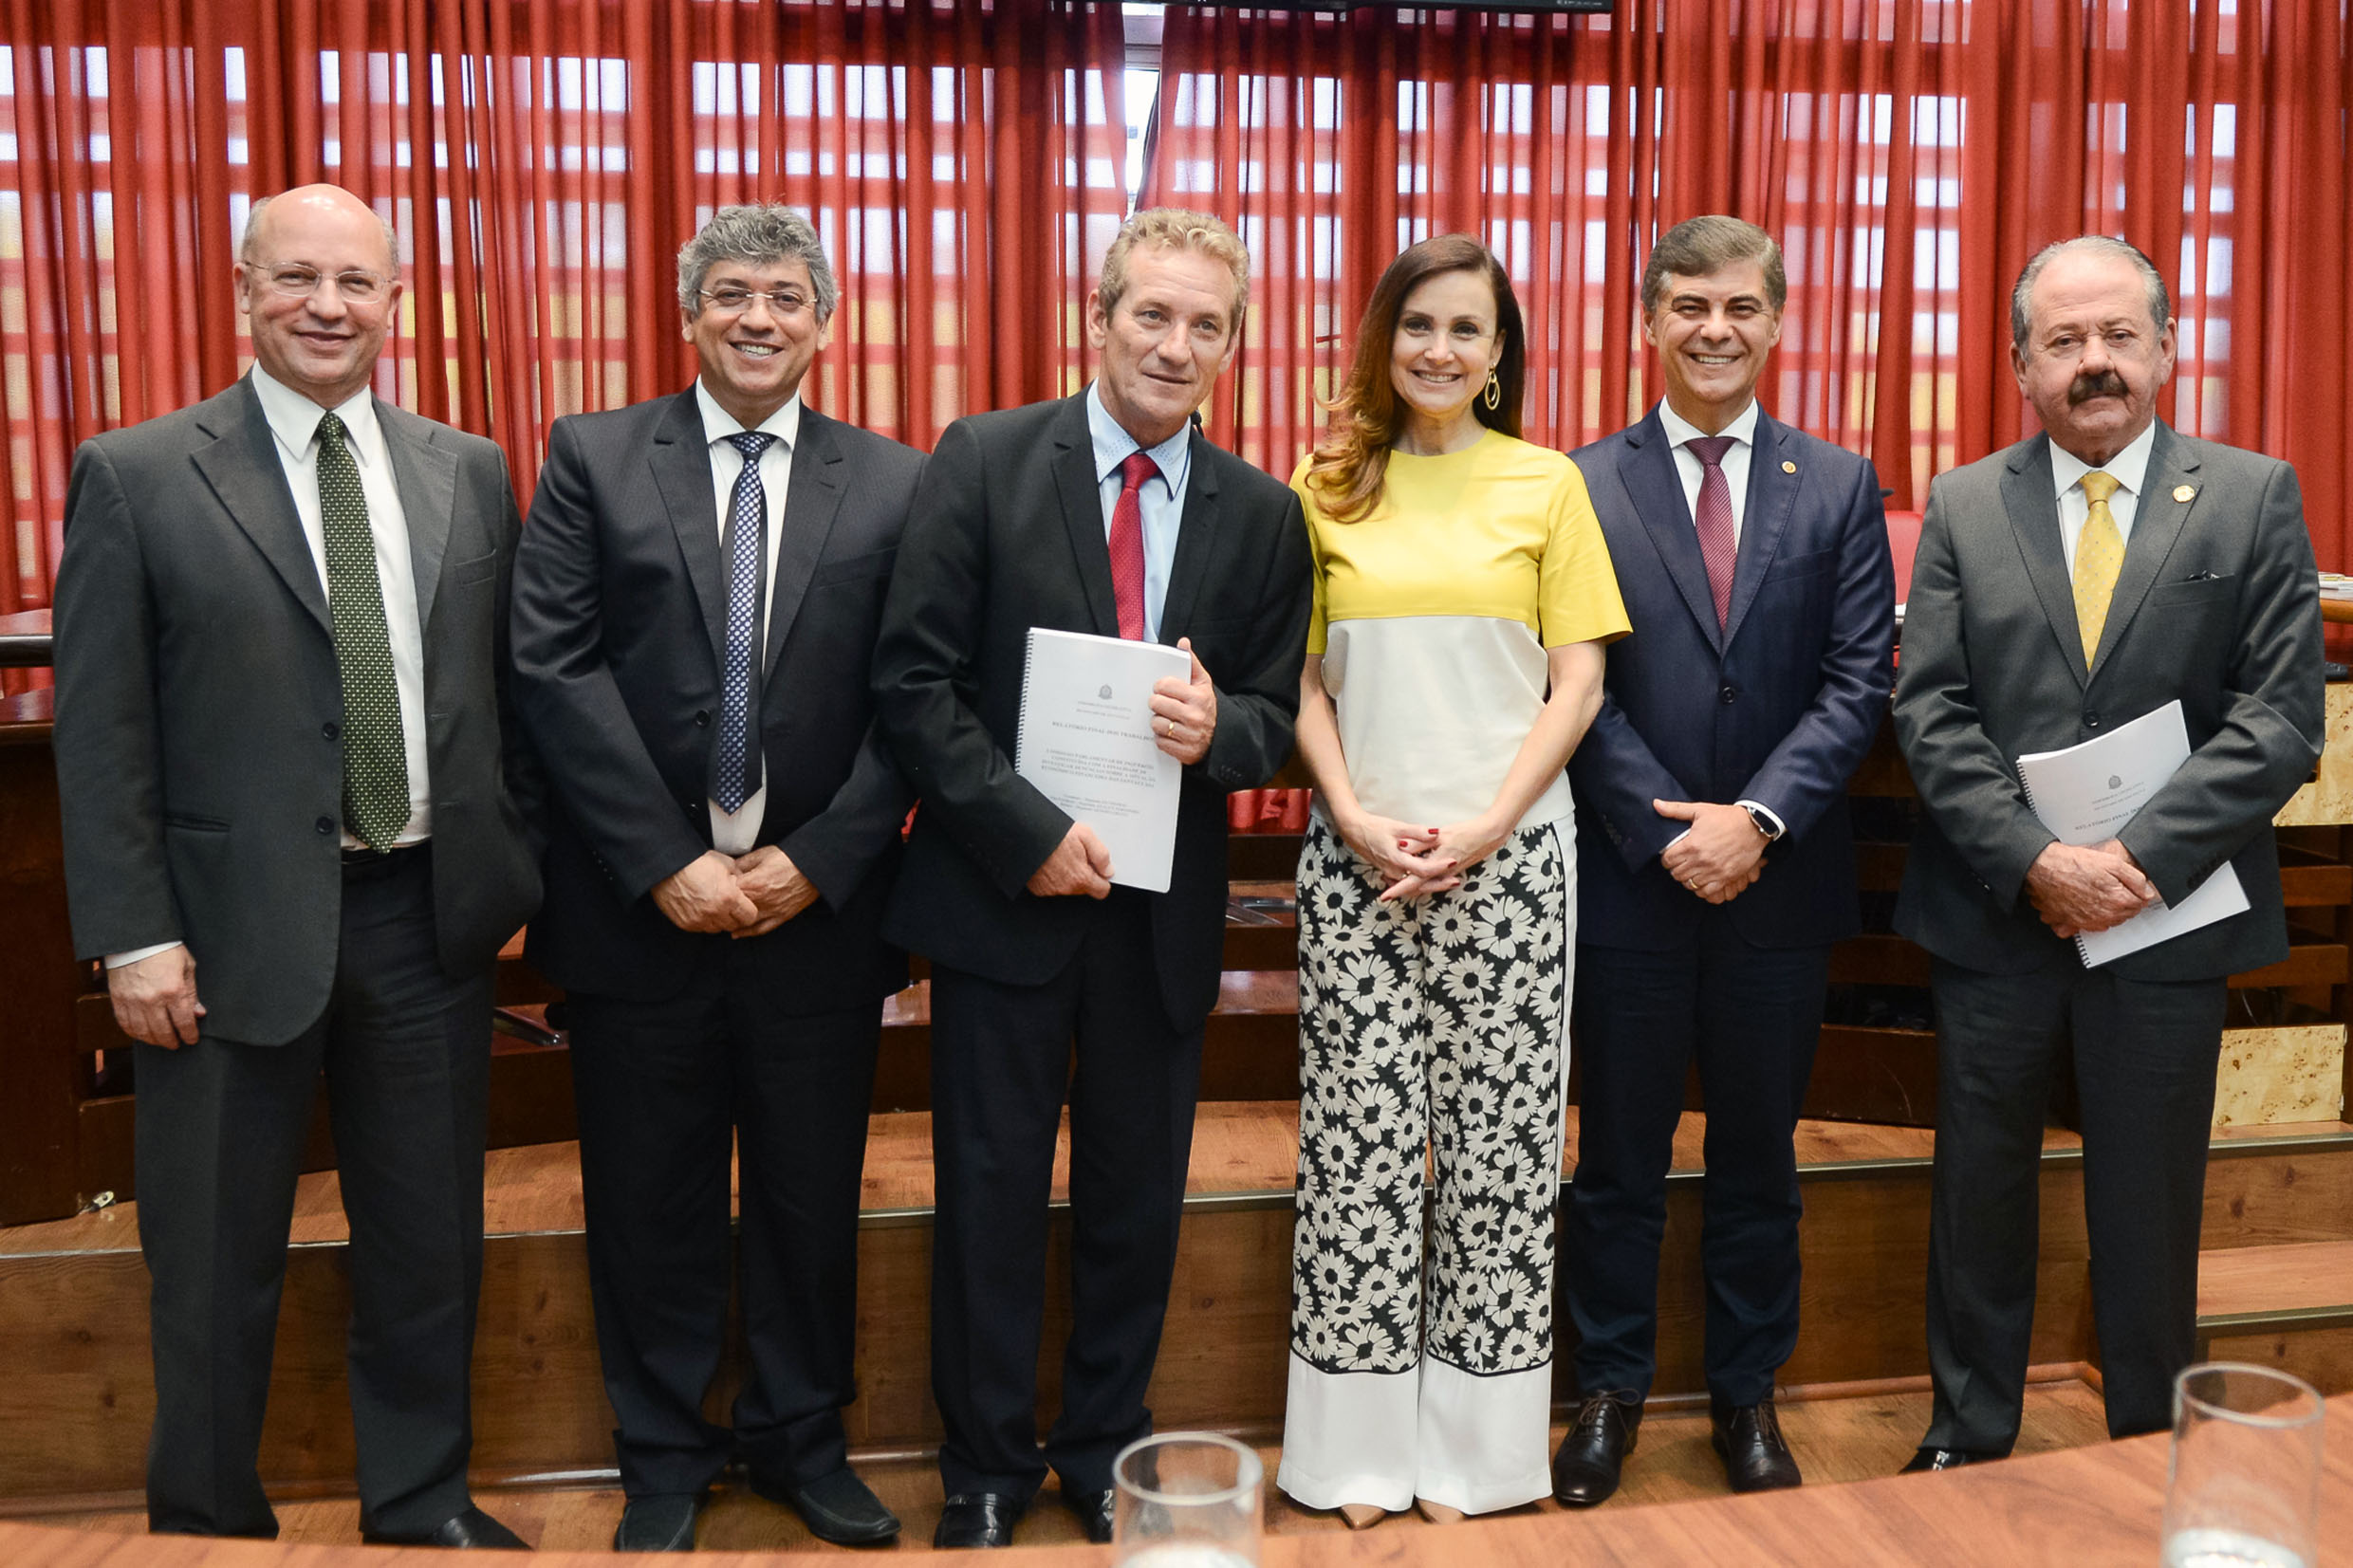 Carlos Neder, Padre Afonso Lobato, Ed Thomas, Analice Fernandes, Gil Lancaster e Celso Giglio<a style='float:right;color:#ccc' href='https://www3.al.sp.gov.br/repositorio/noticia/N-10-2015/fg176794.jpg' target=_blank><i class='bi bi-zoom-in'></i> Clique para ver a imagem </a>